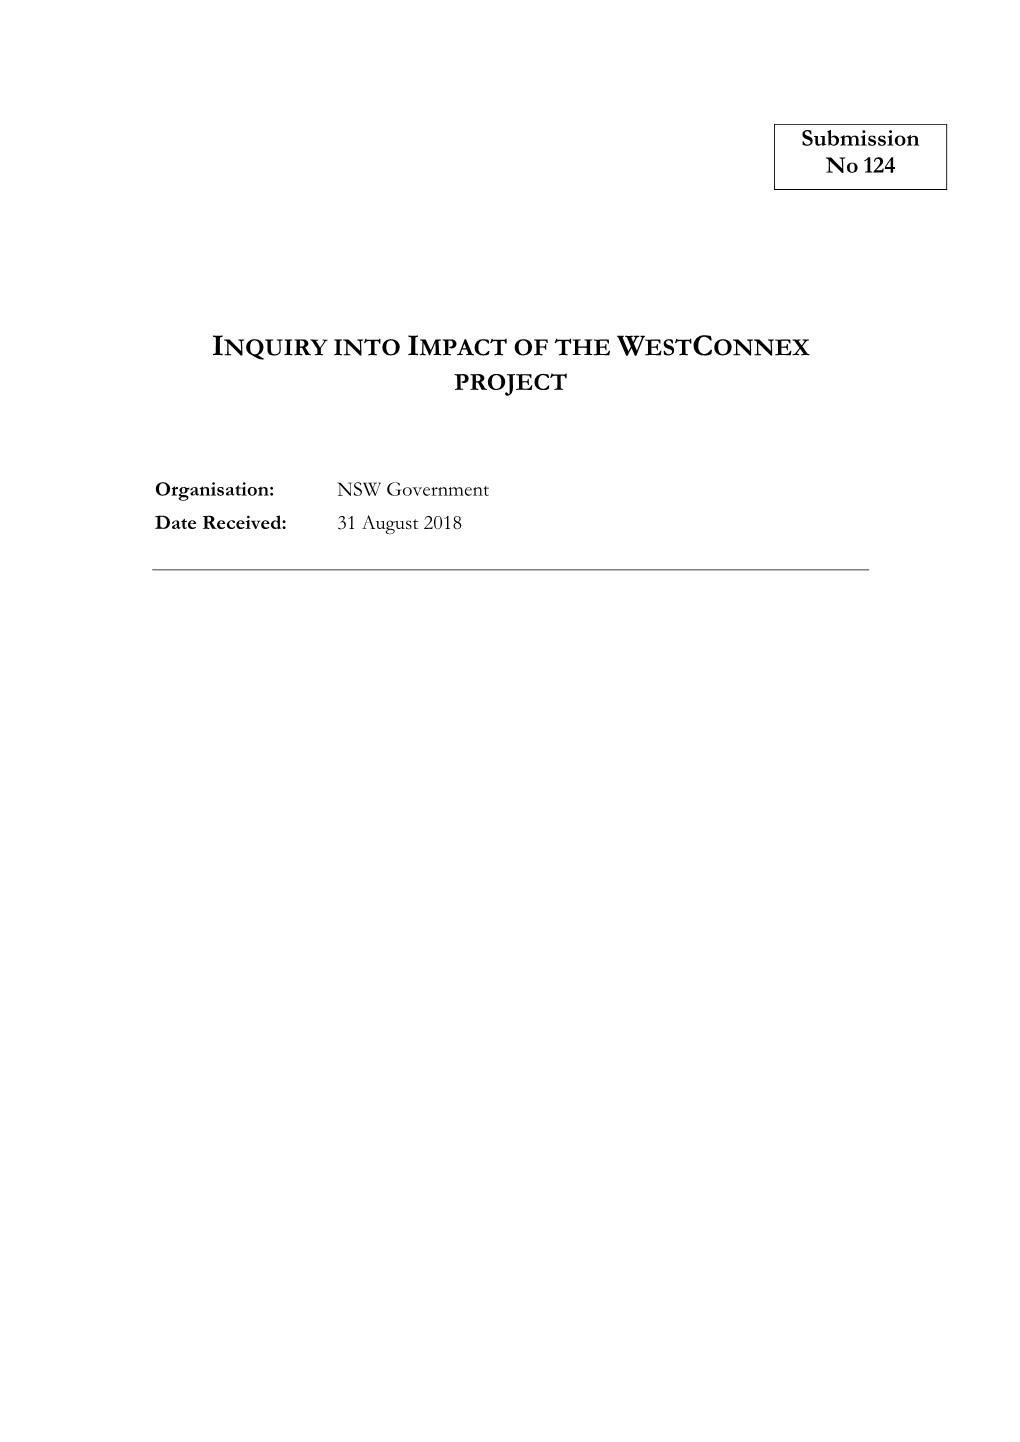 Submission No 124 INQUIRY INTO IMPACT of the WESTCONNEX